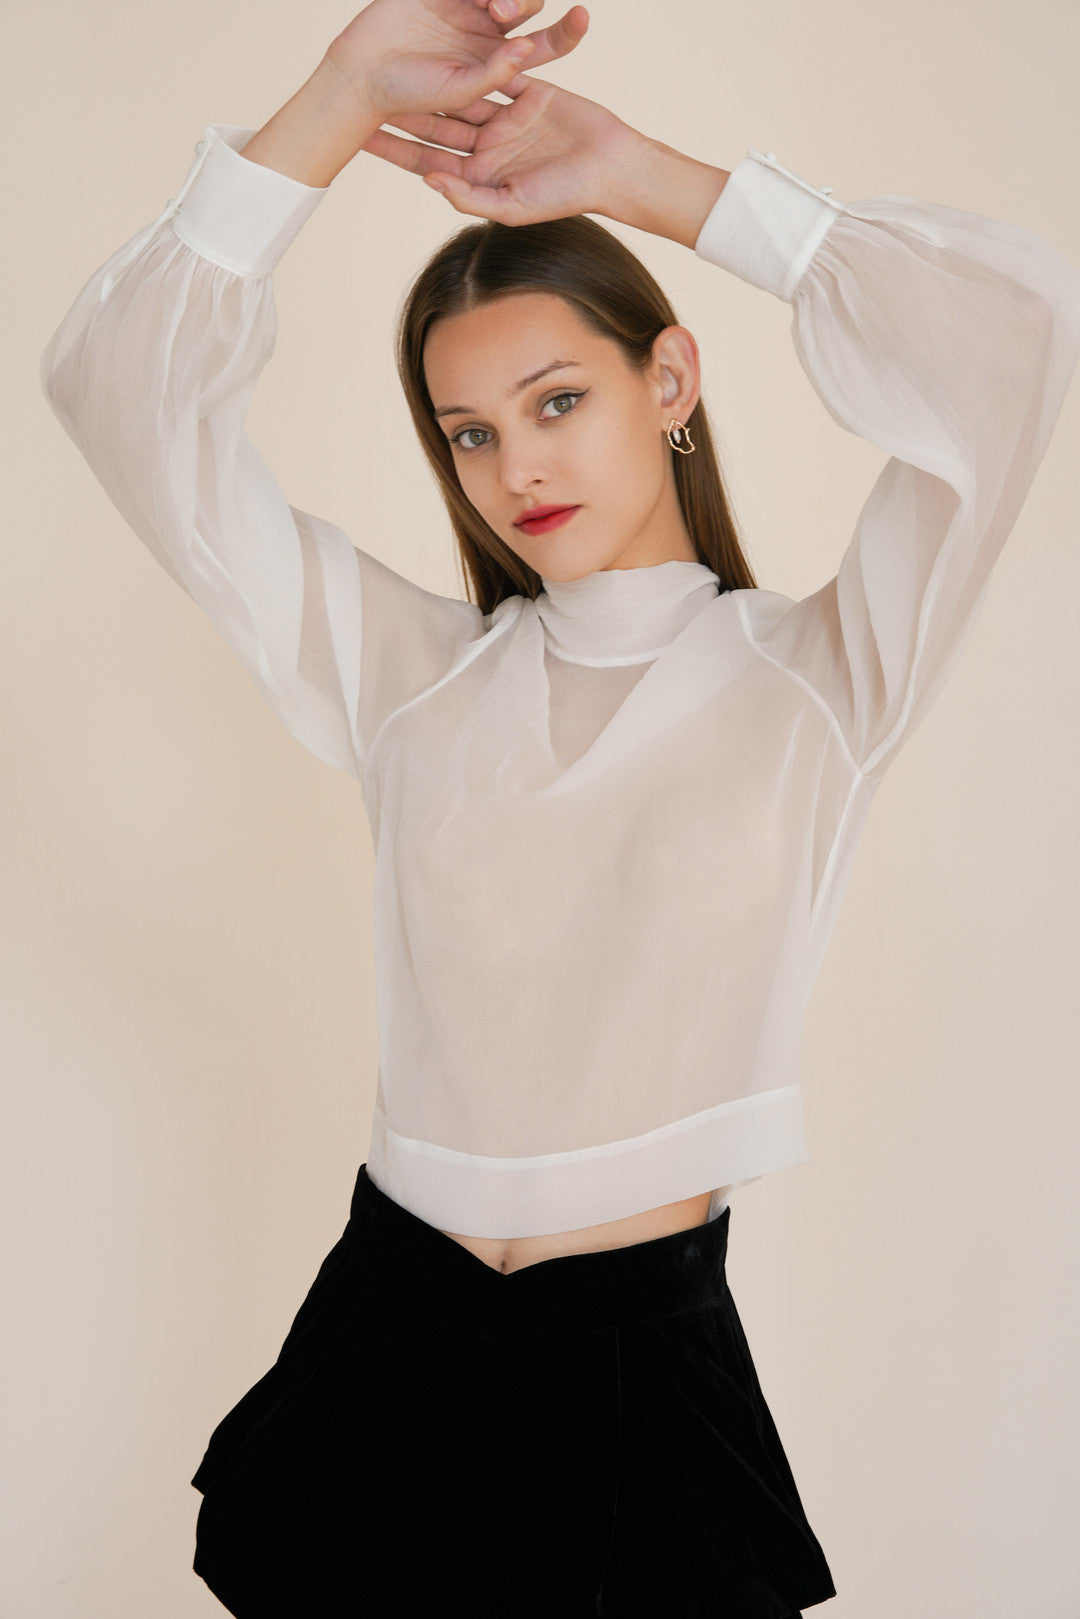 UUNIQ SWAN SONG Tied Bow White Mesh Blouse